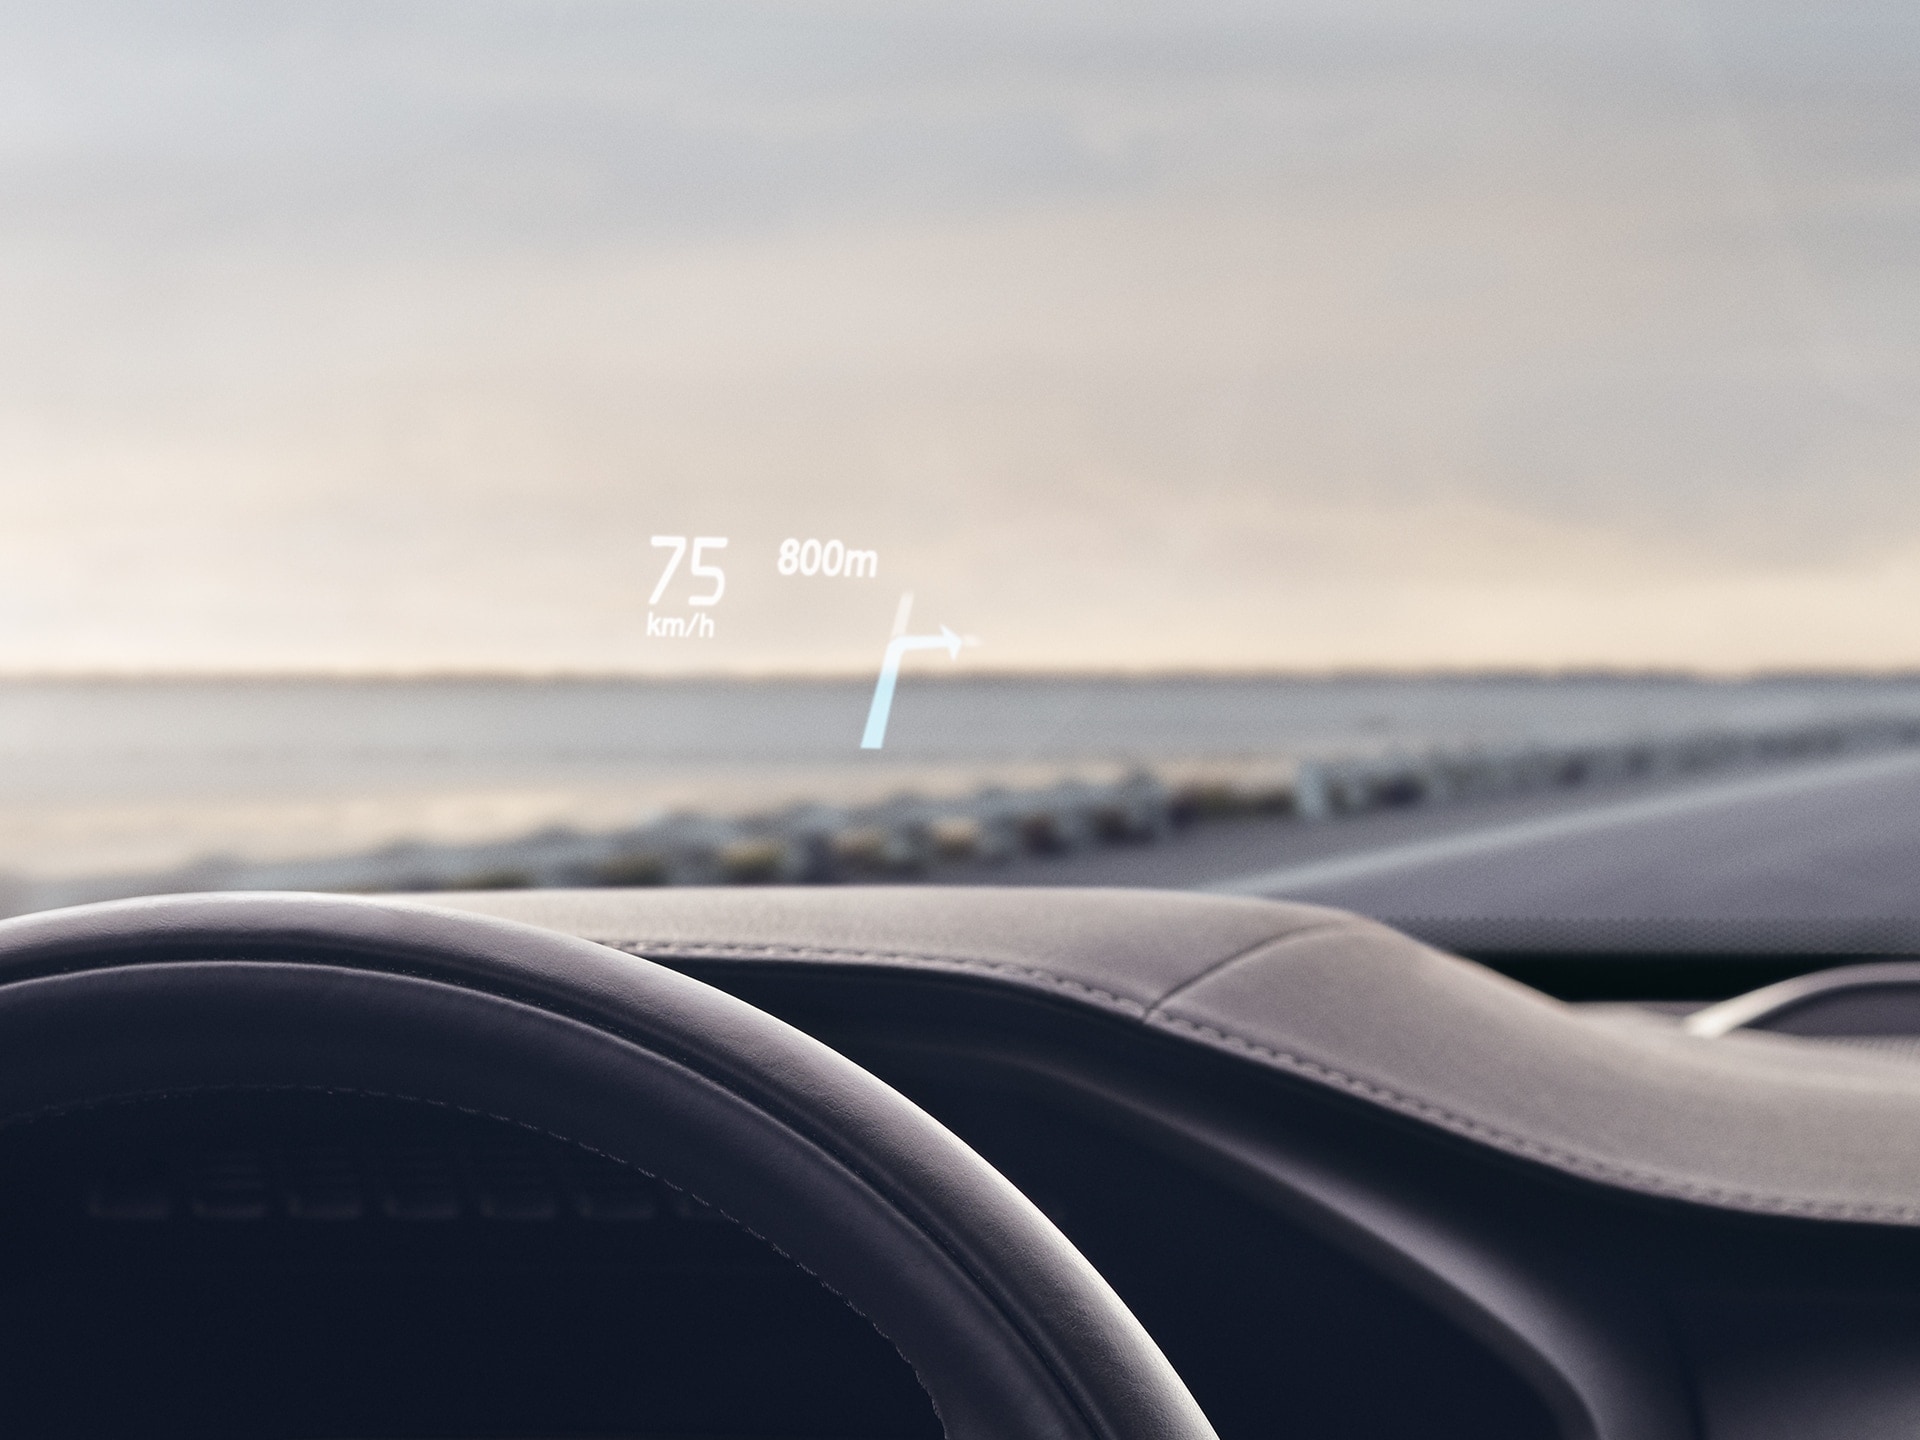 Inside a Volvo, head-up display showing driving speed and navigation on the windshield.